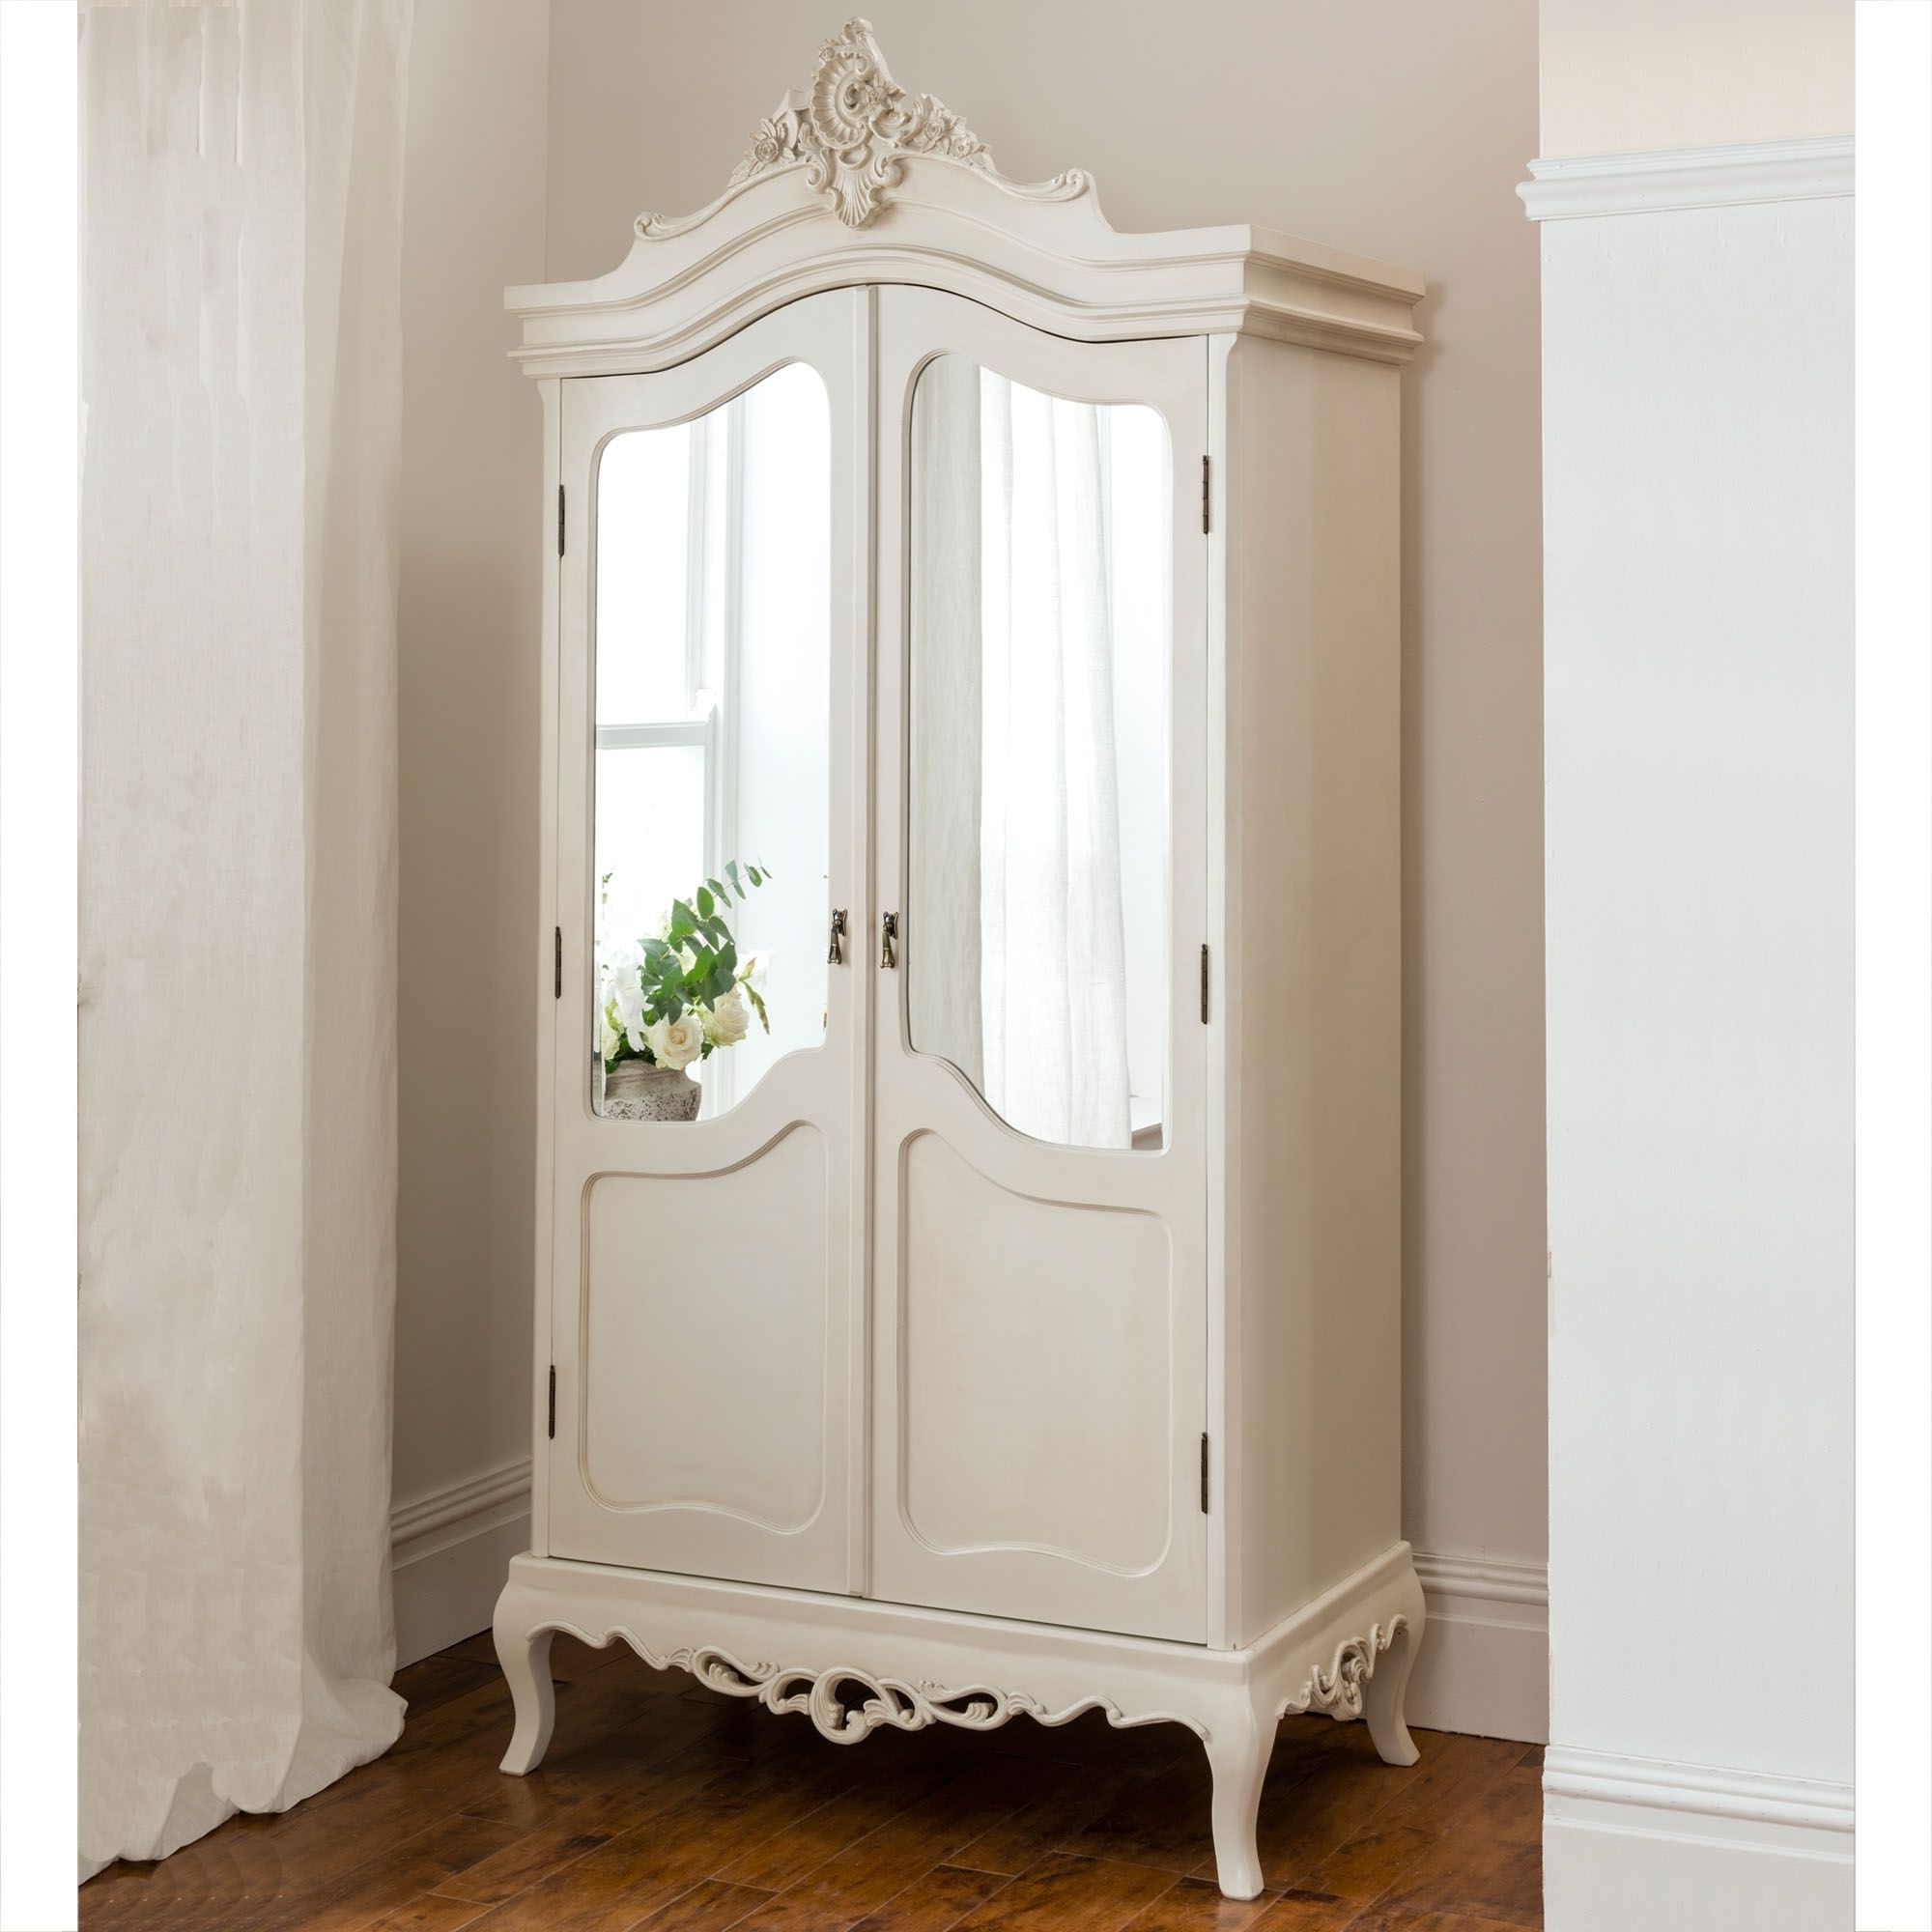 Annaelle Antique French Wardrobe With French Wardrobes (View 7 of 20)